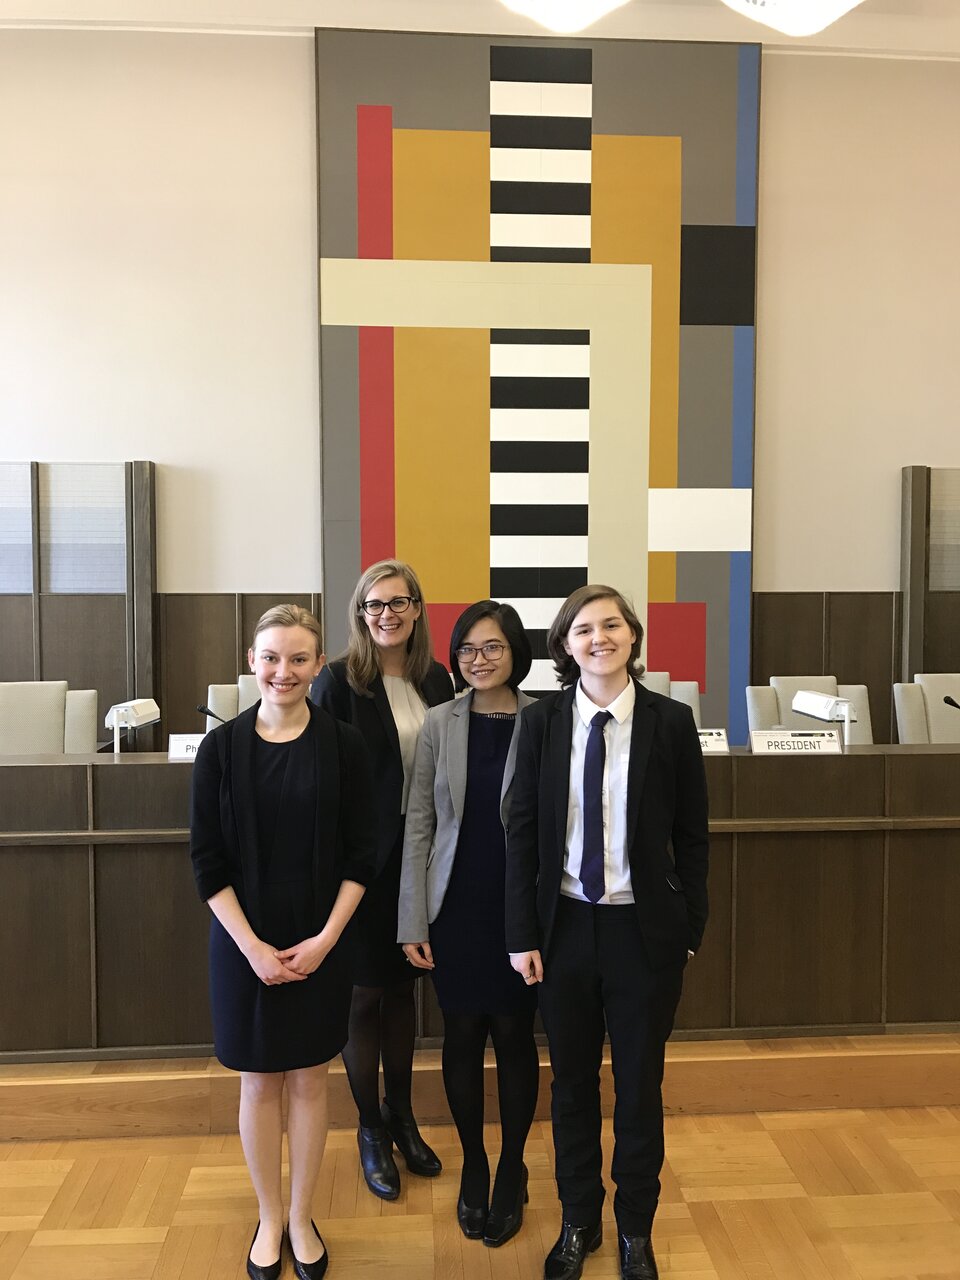 Jenni was Advisor for the team from Helsinki University at the 2017 Manfred Lachs Space Law Moot Court Competition, organised in Helsinki. The team was awarded second place. 